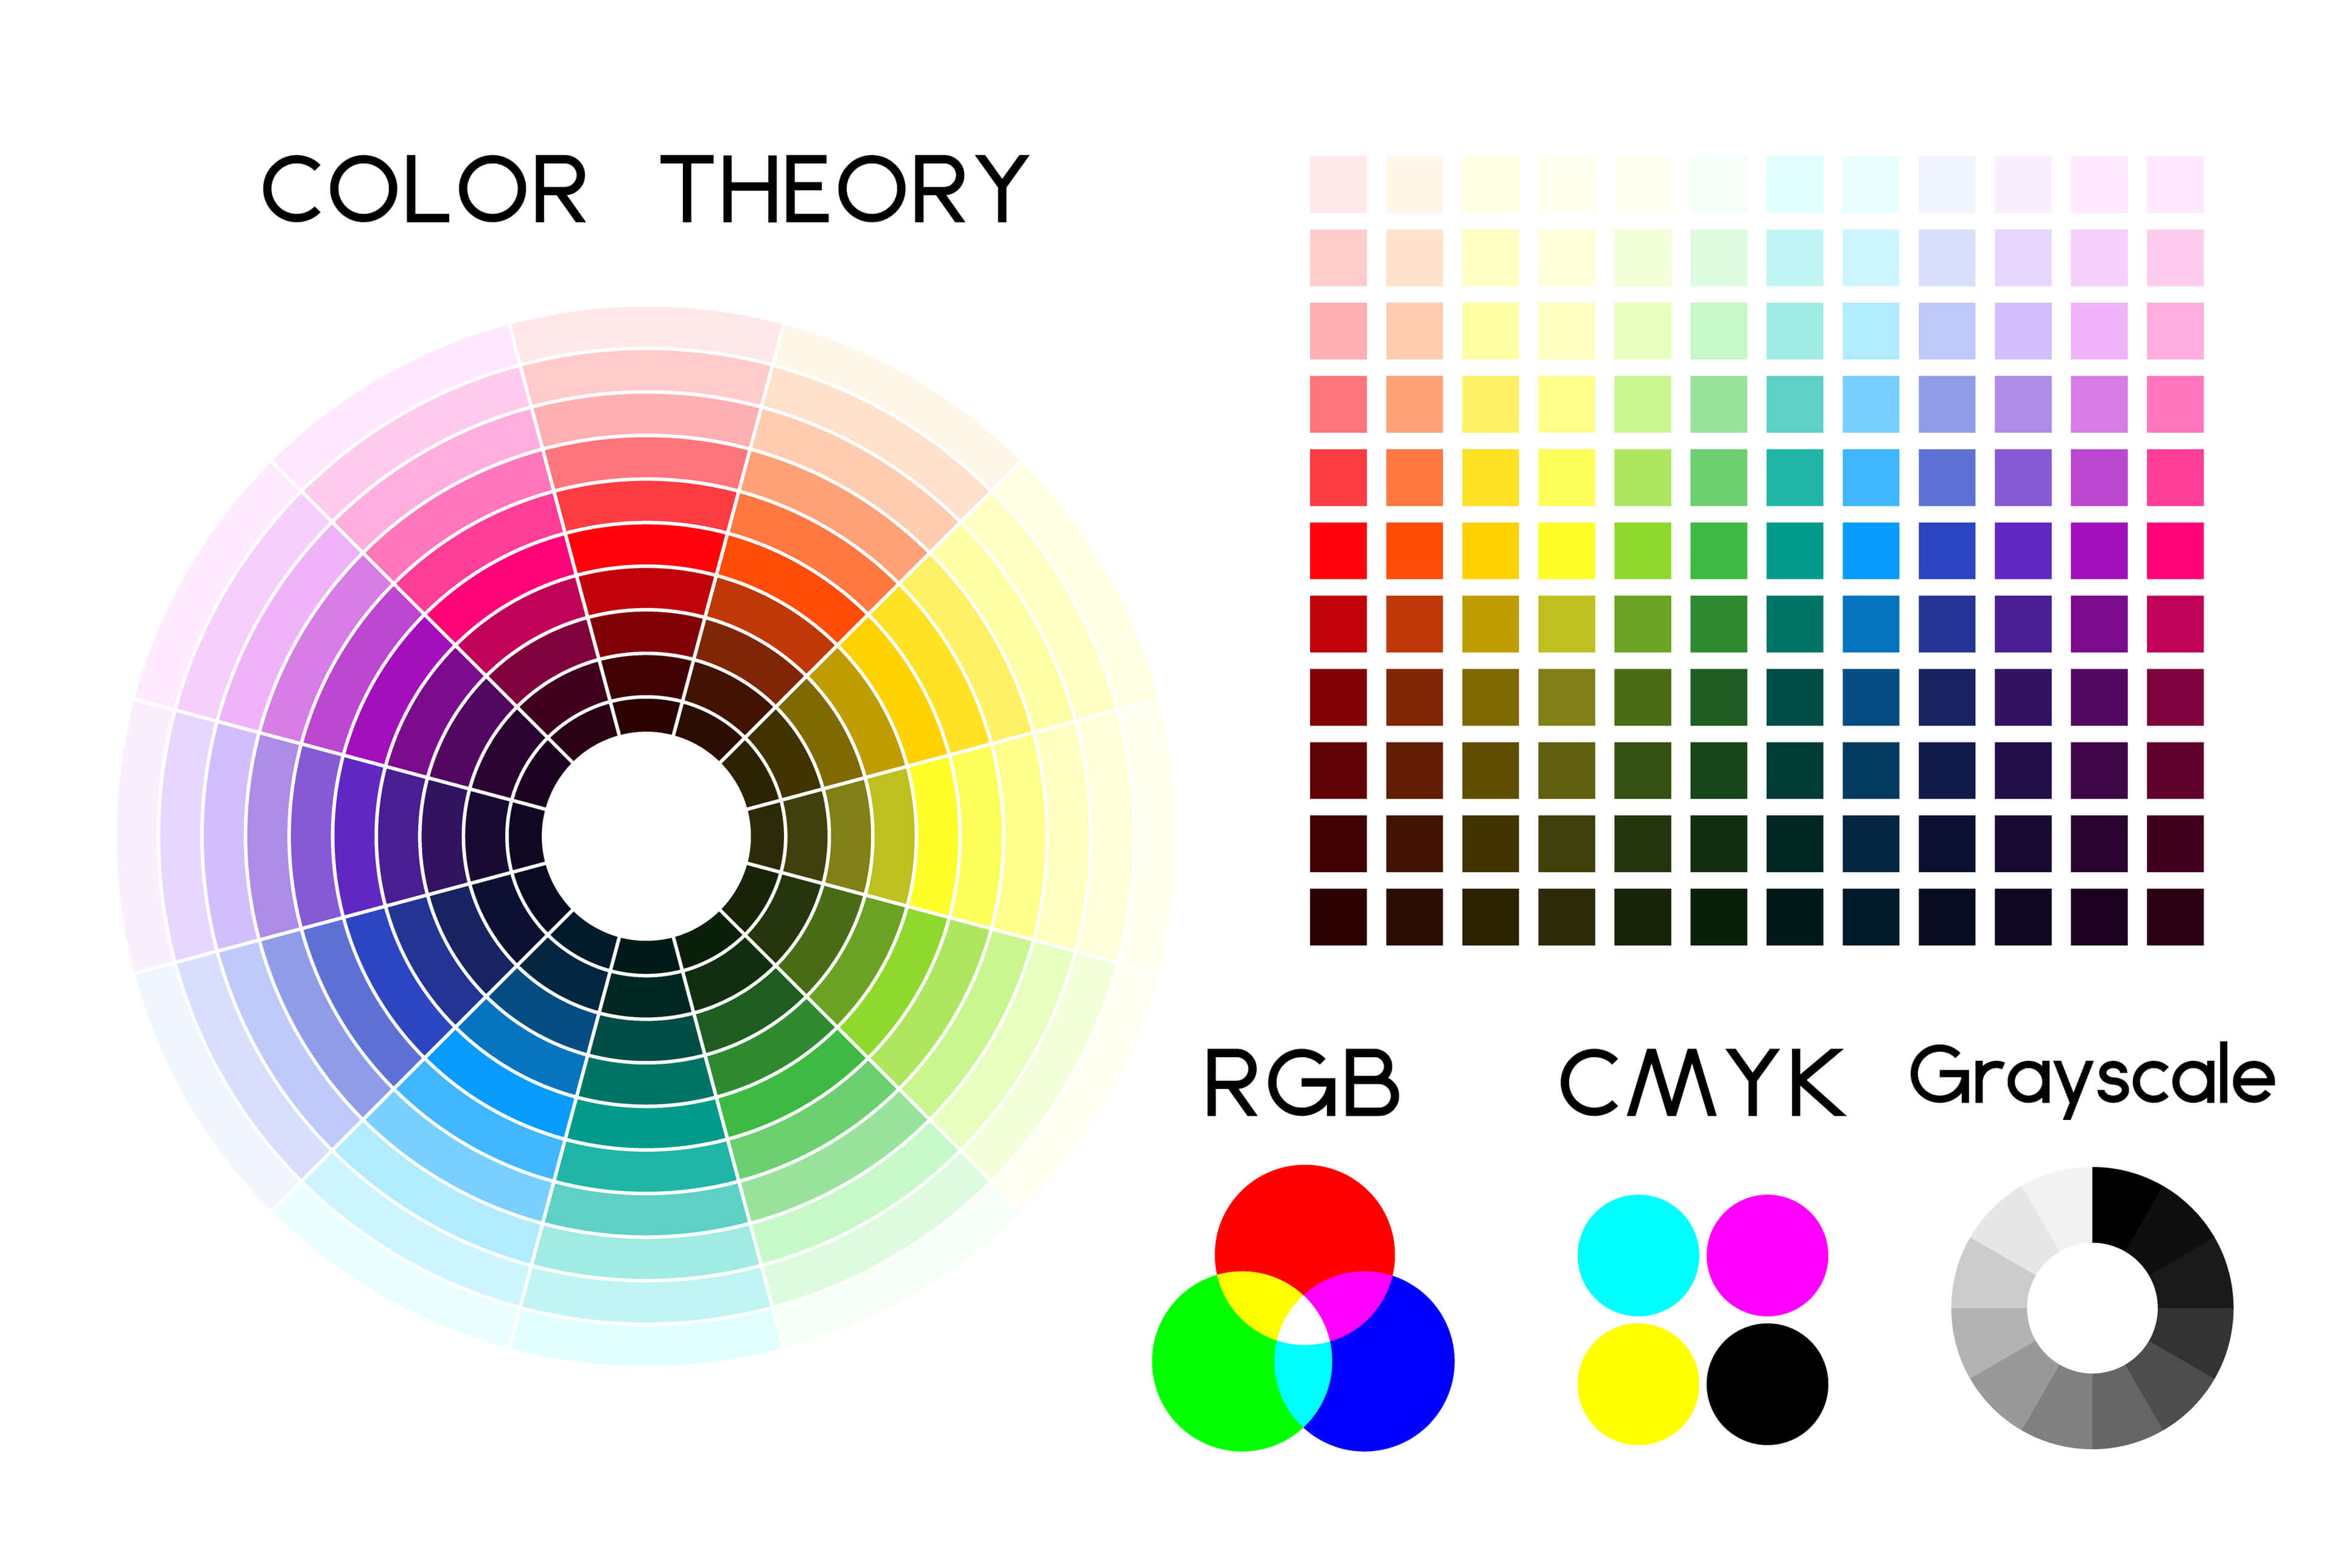 Color palette wheel depicting different colors and combinations